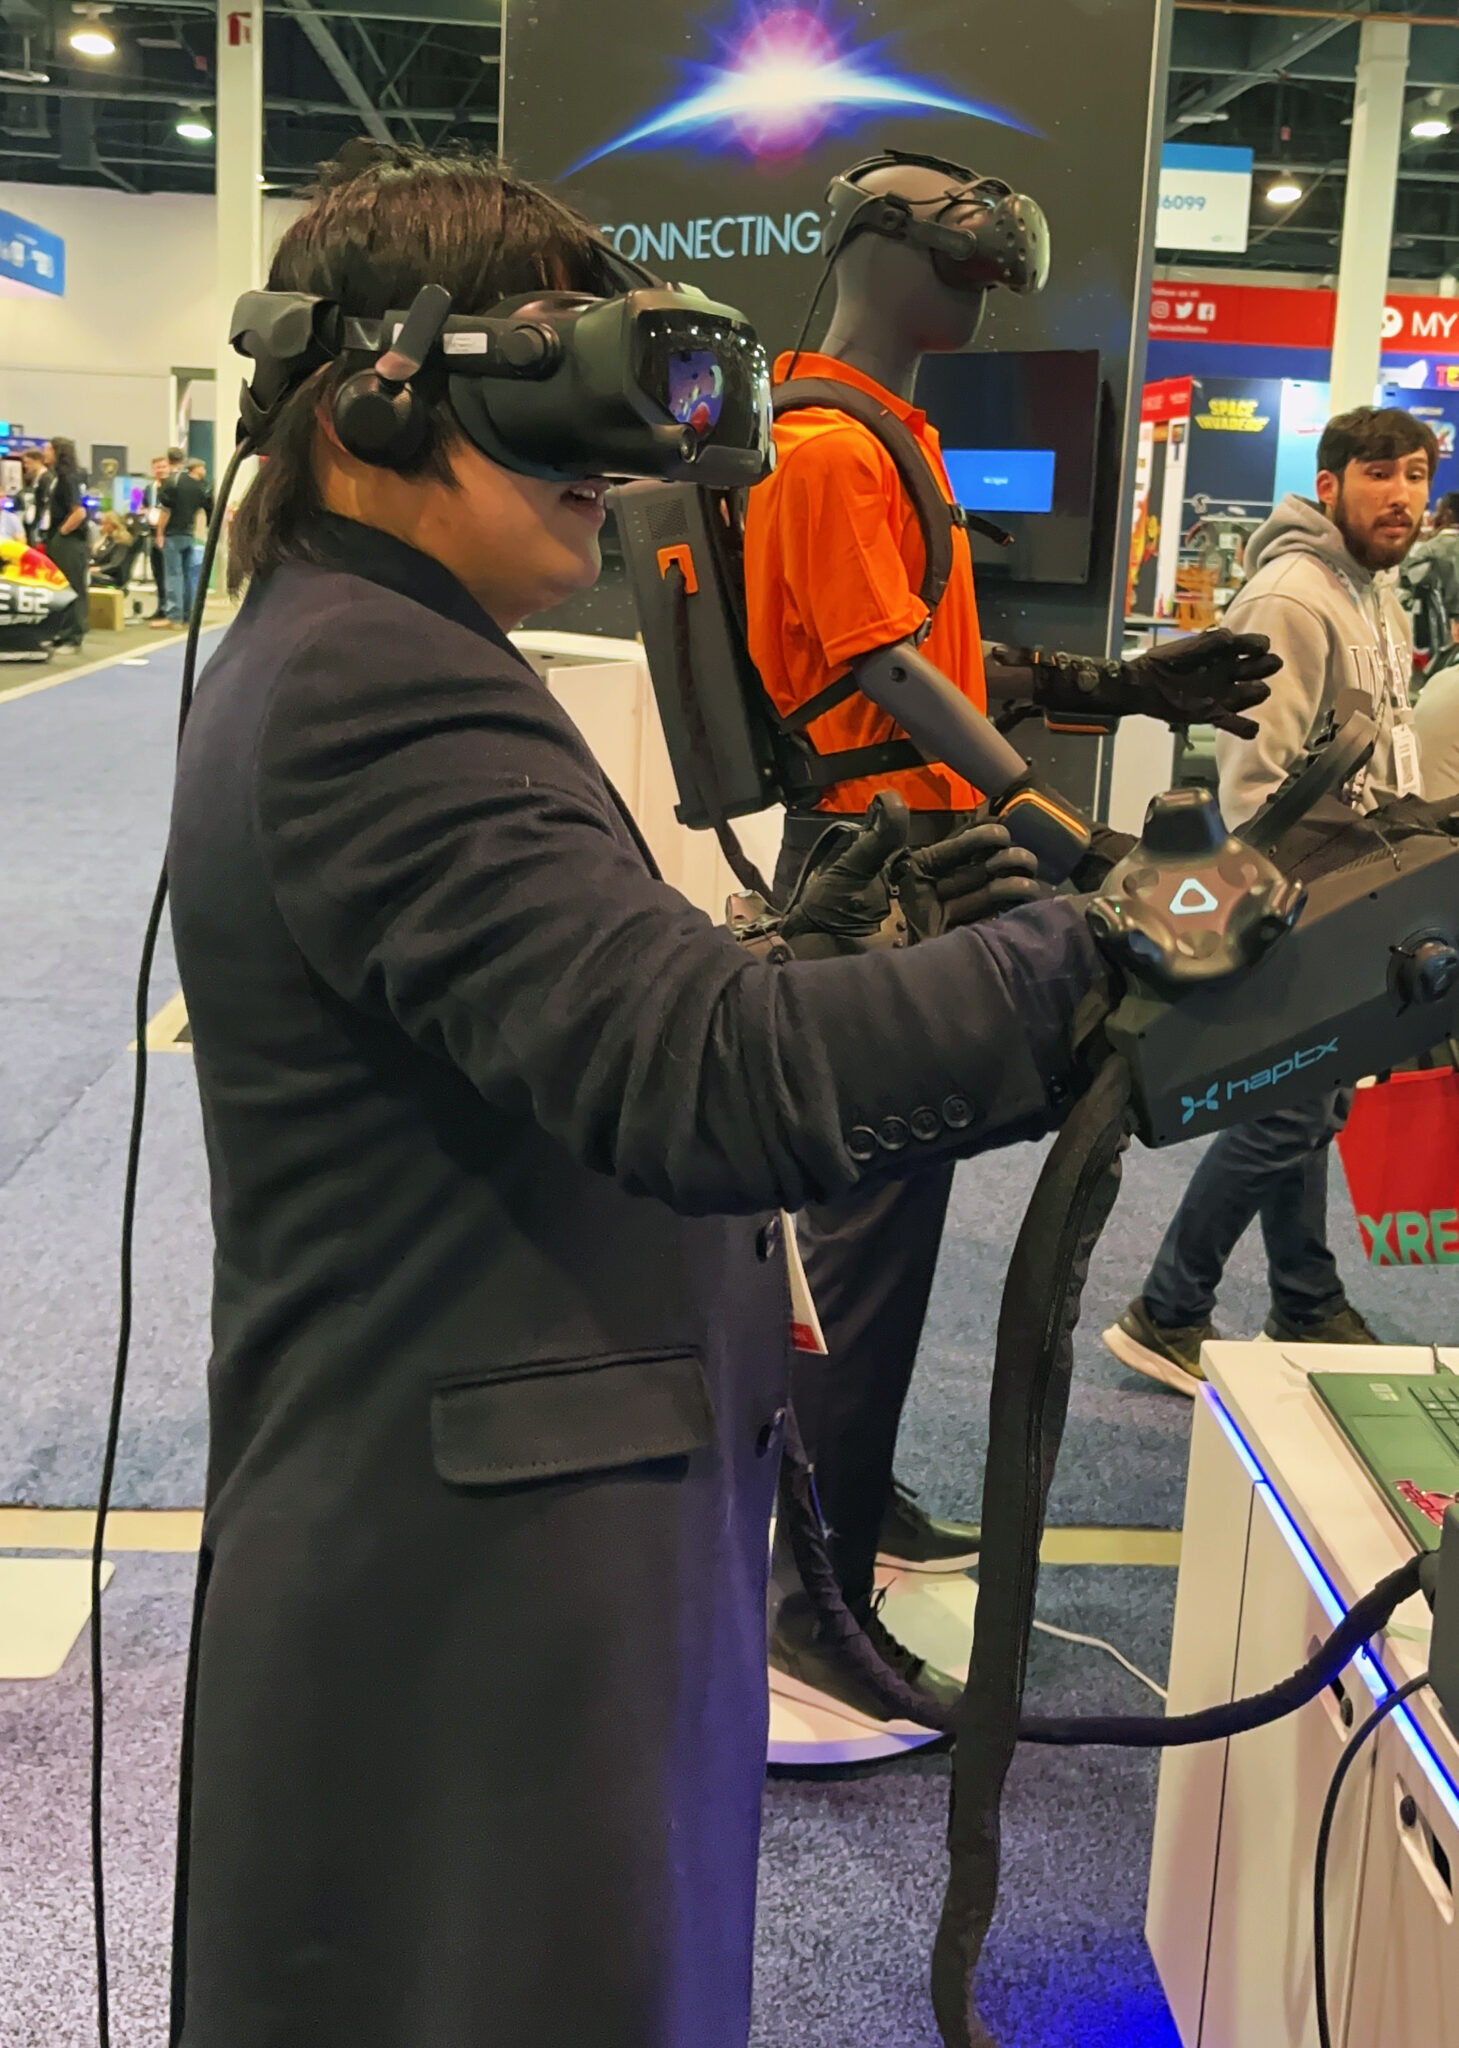 a person participates in a demo of a haptic virtual reality experience.